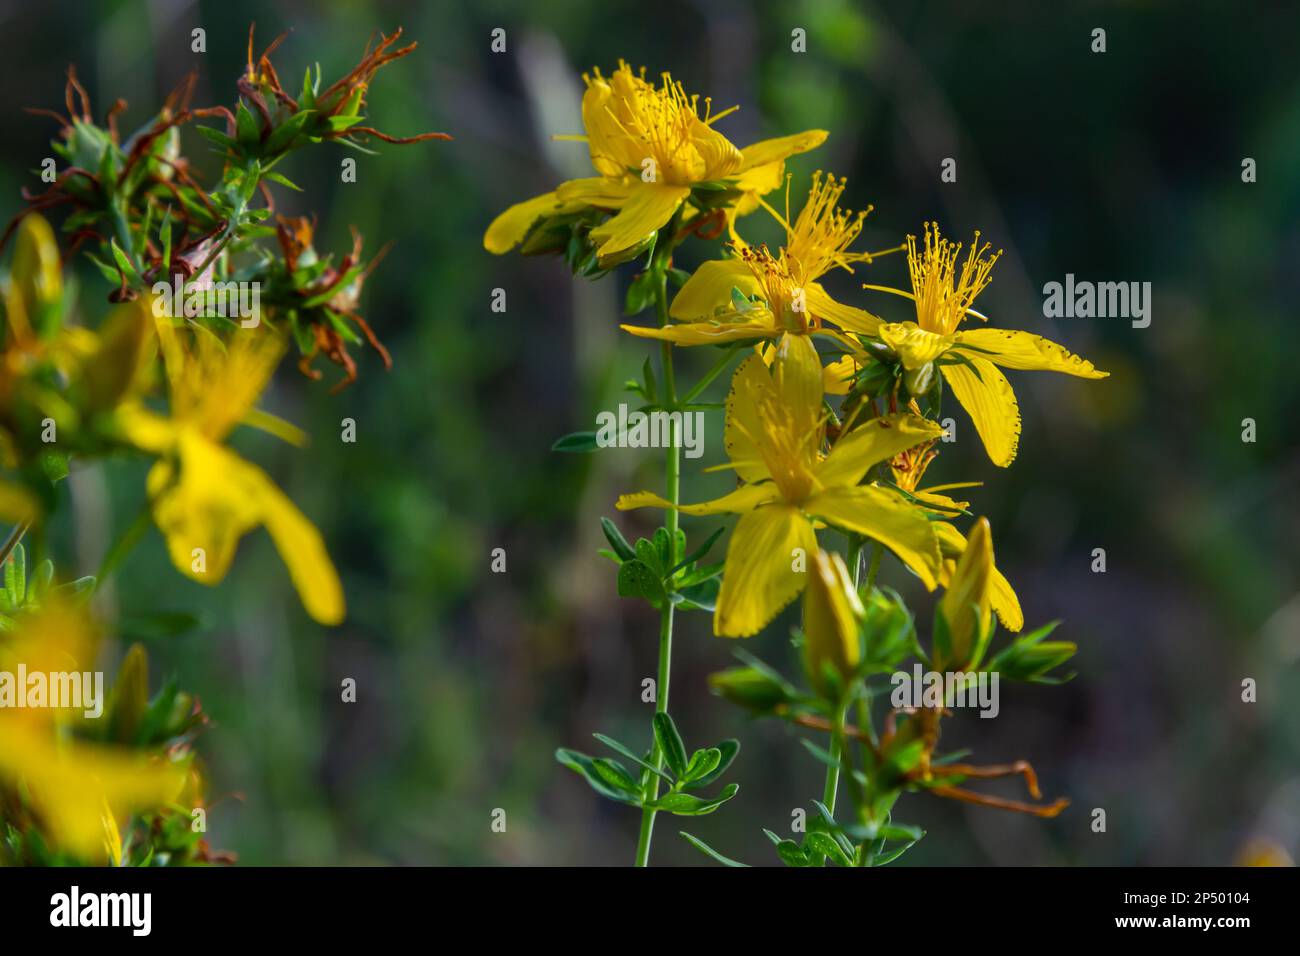 Hypericum flowers Hypericum perforatum or St Johns wort on the meadow , selective focus on some flowers. Stock Photo